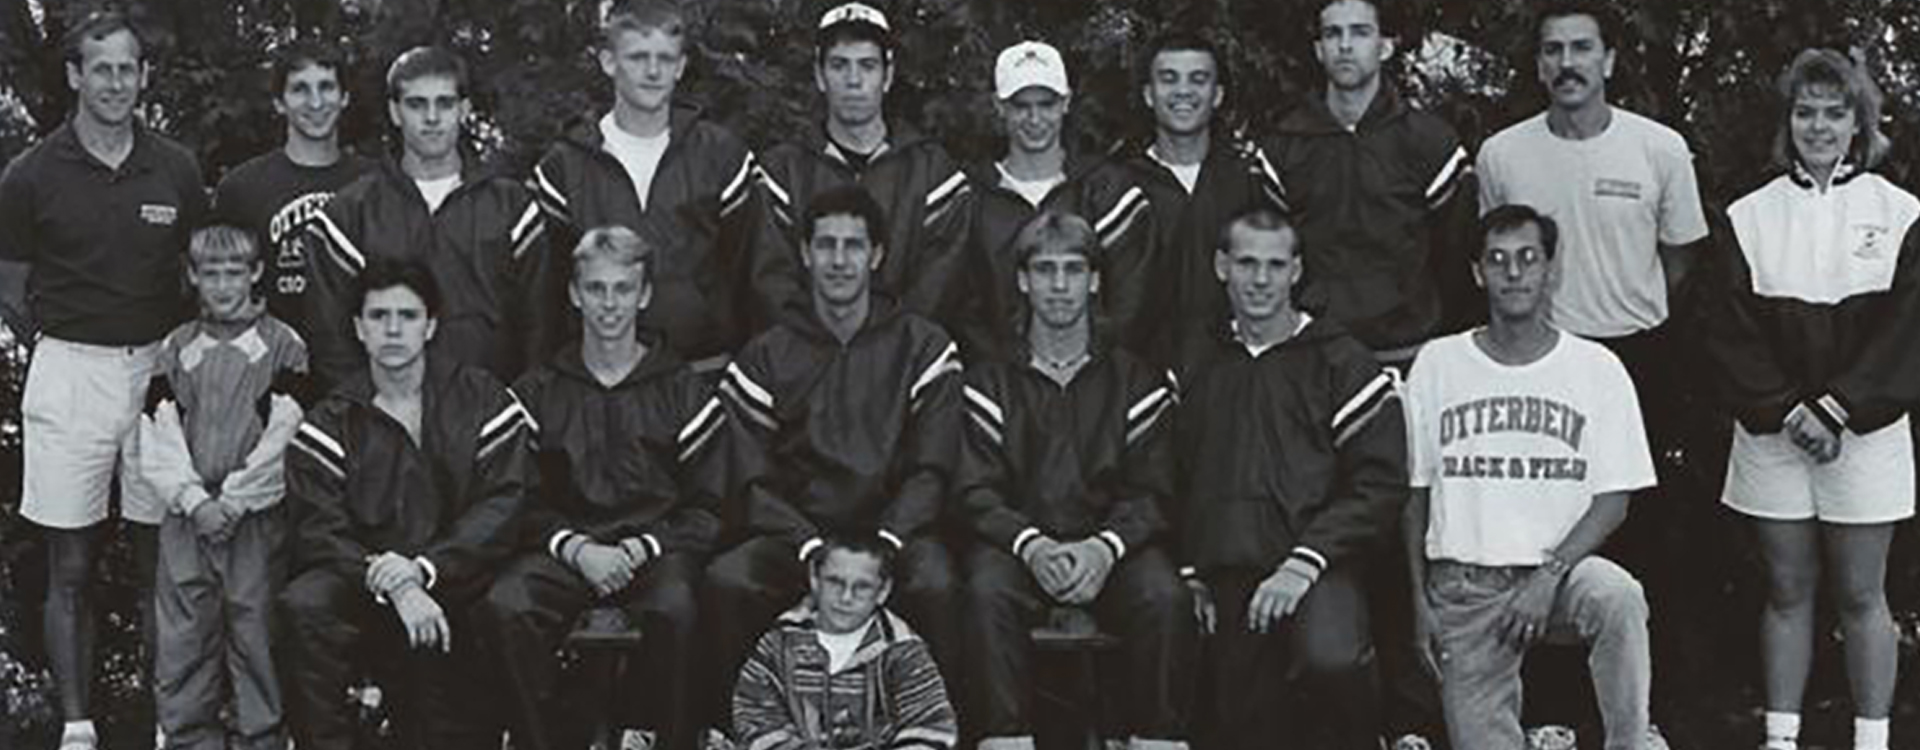 Chad Myers - 1994 Otterbein Cross Country Team Photo